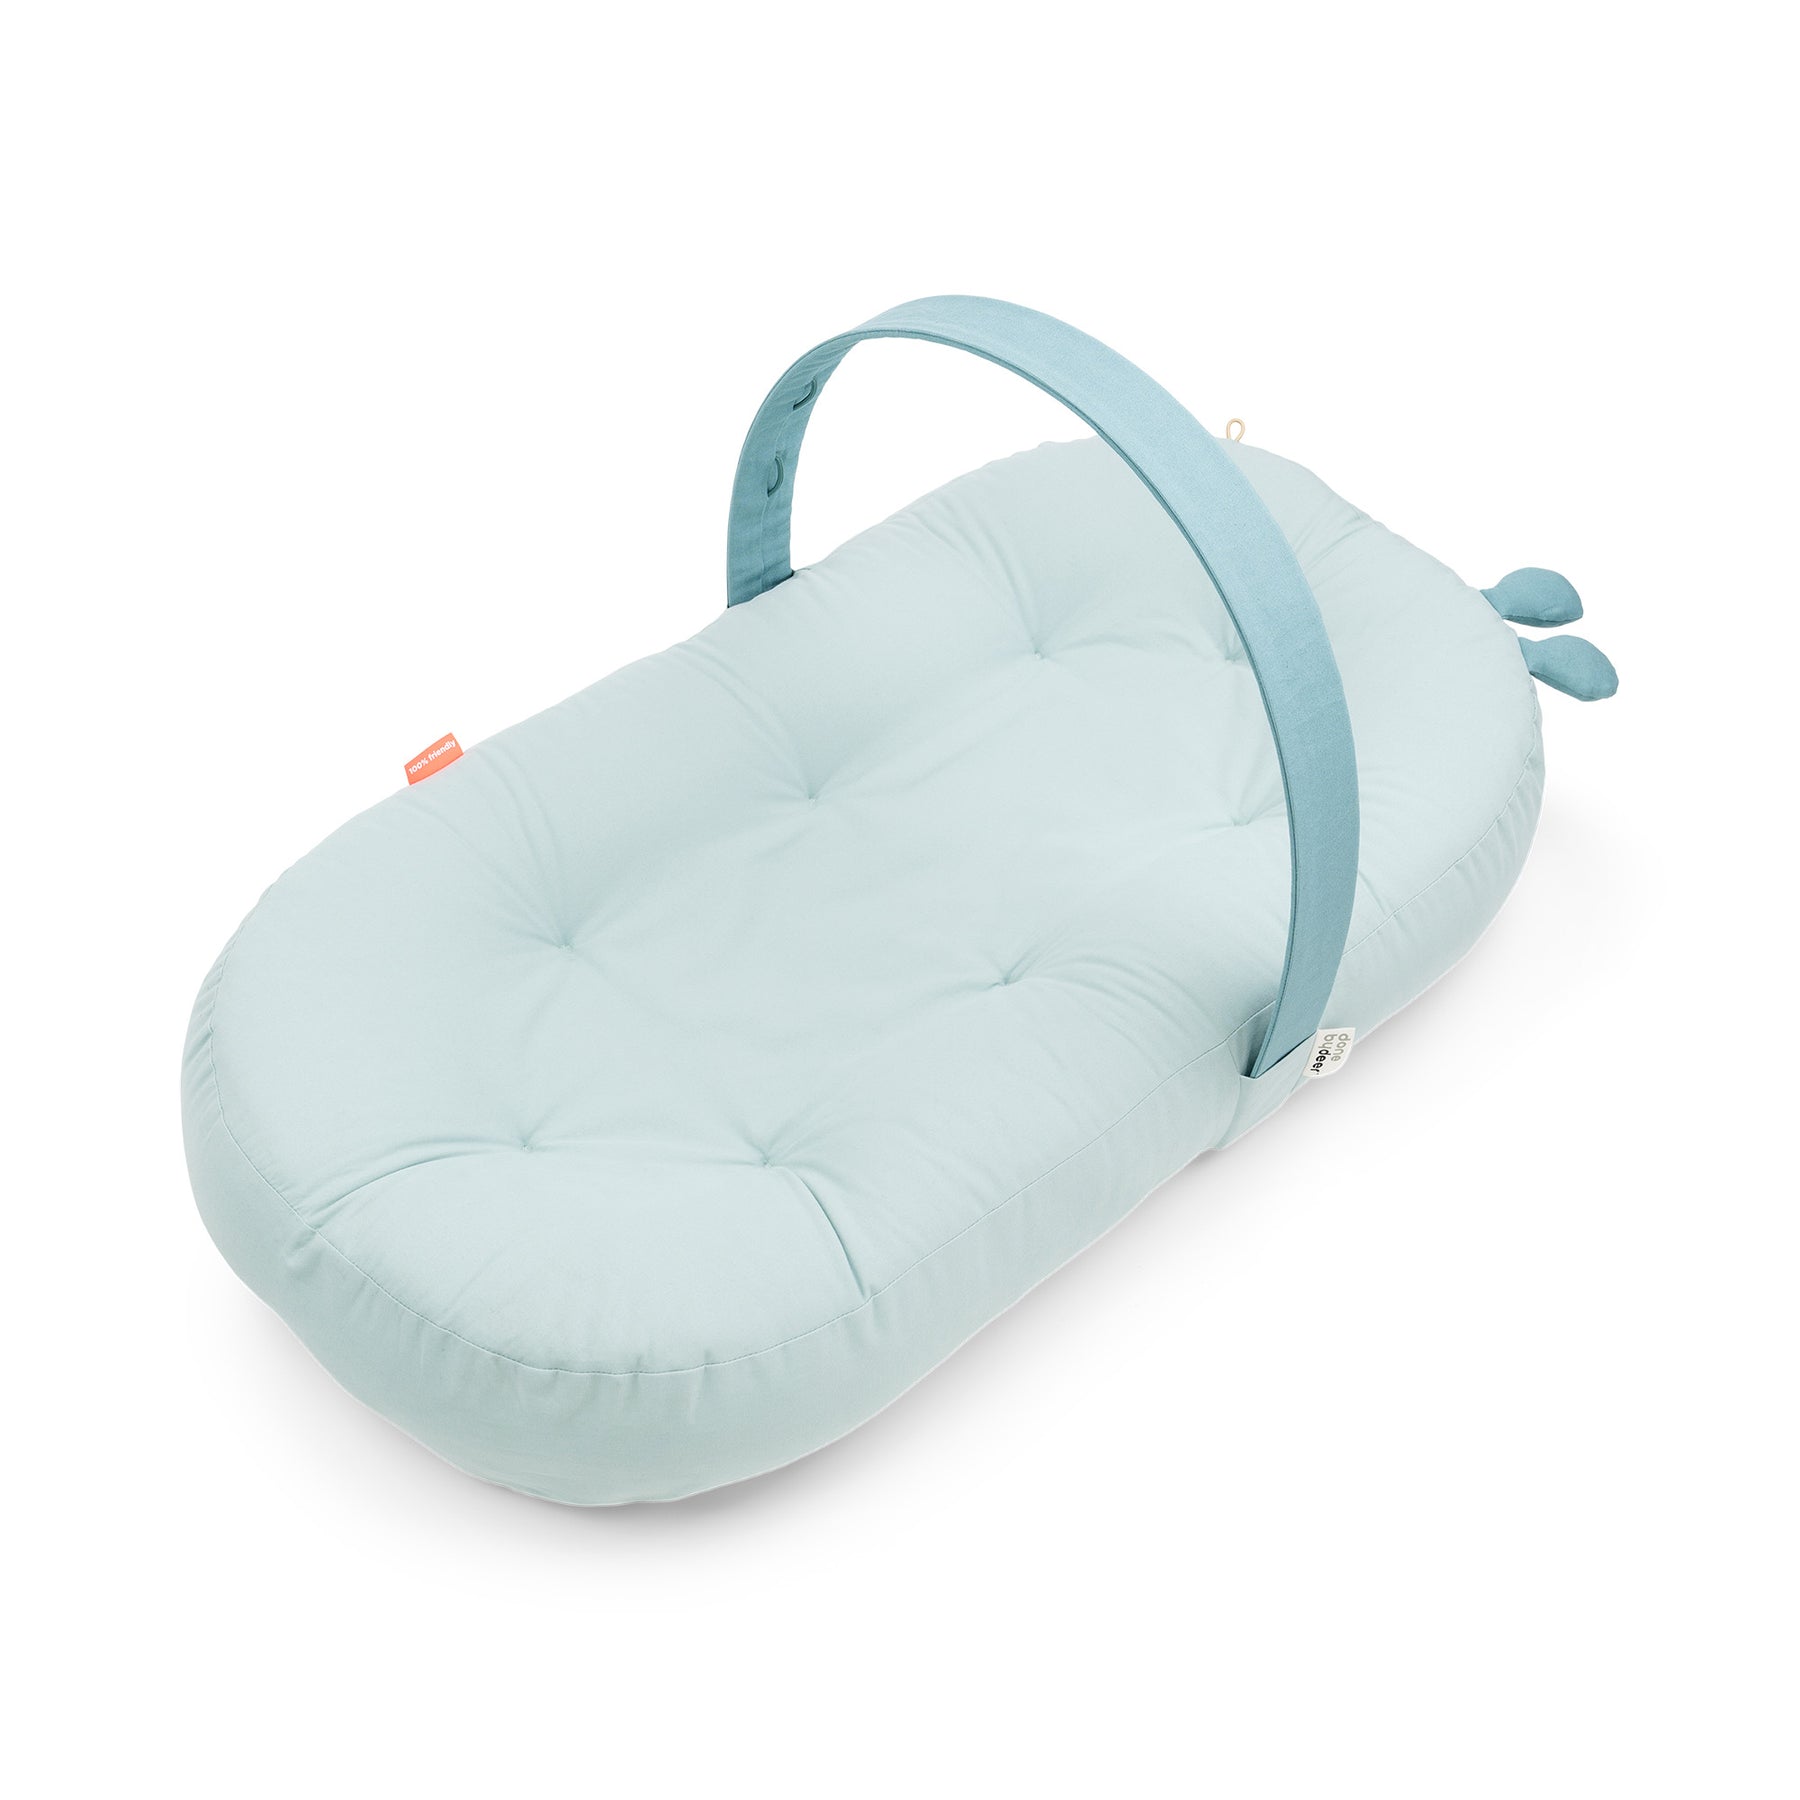 Cozy lounger with activity arch - Raffi - Blue - Front